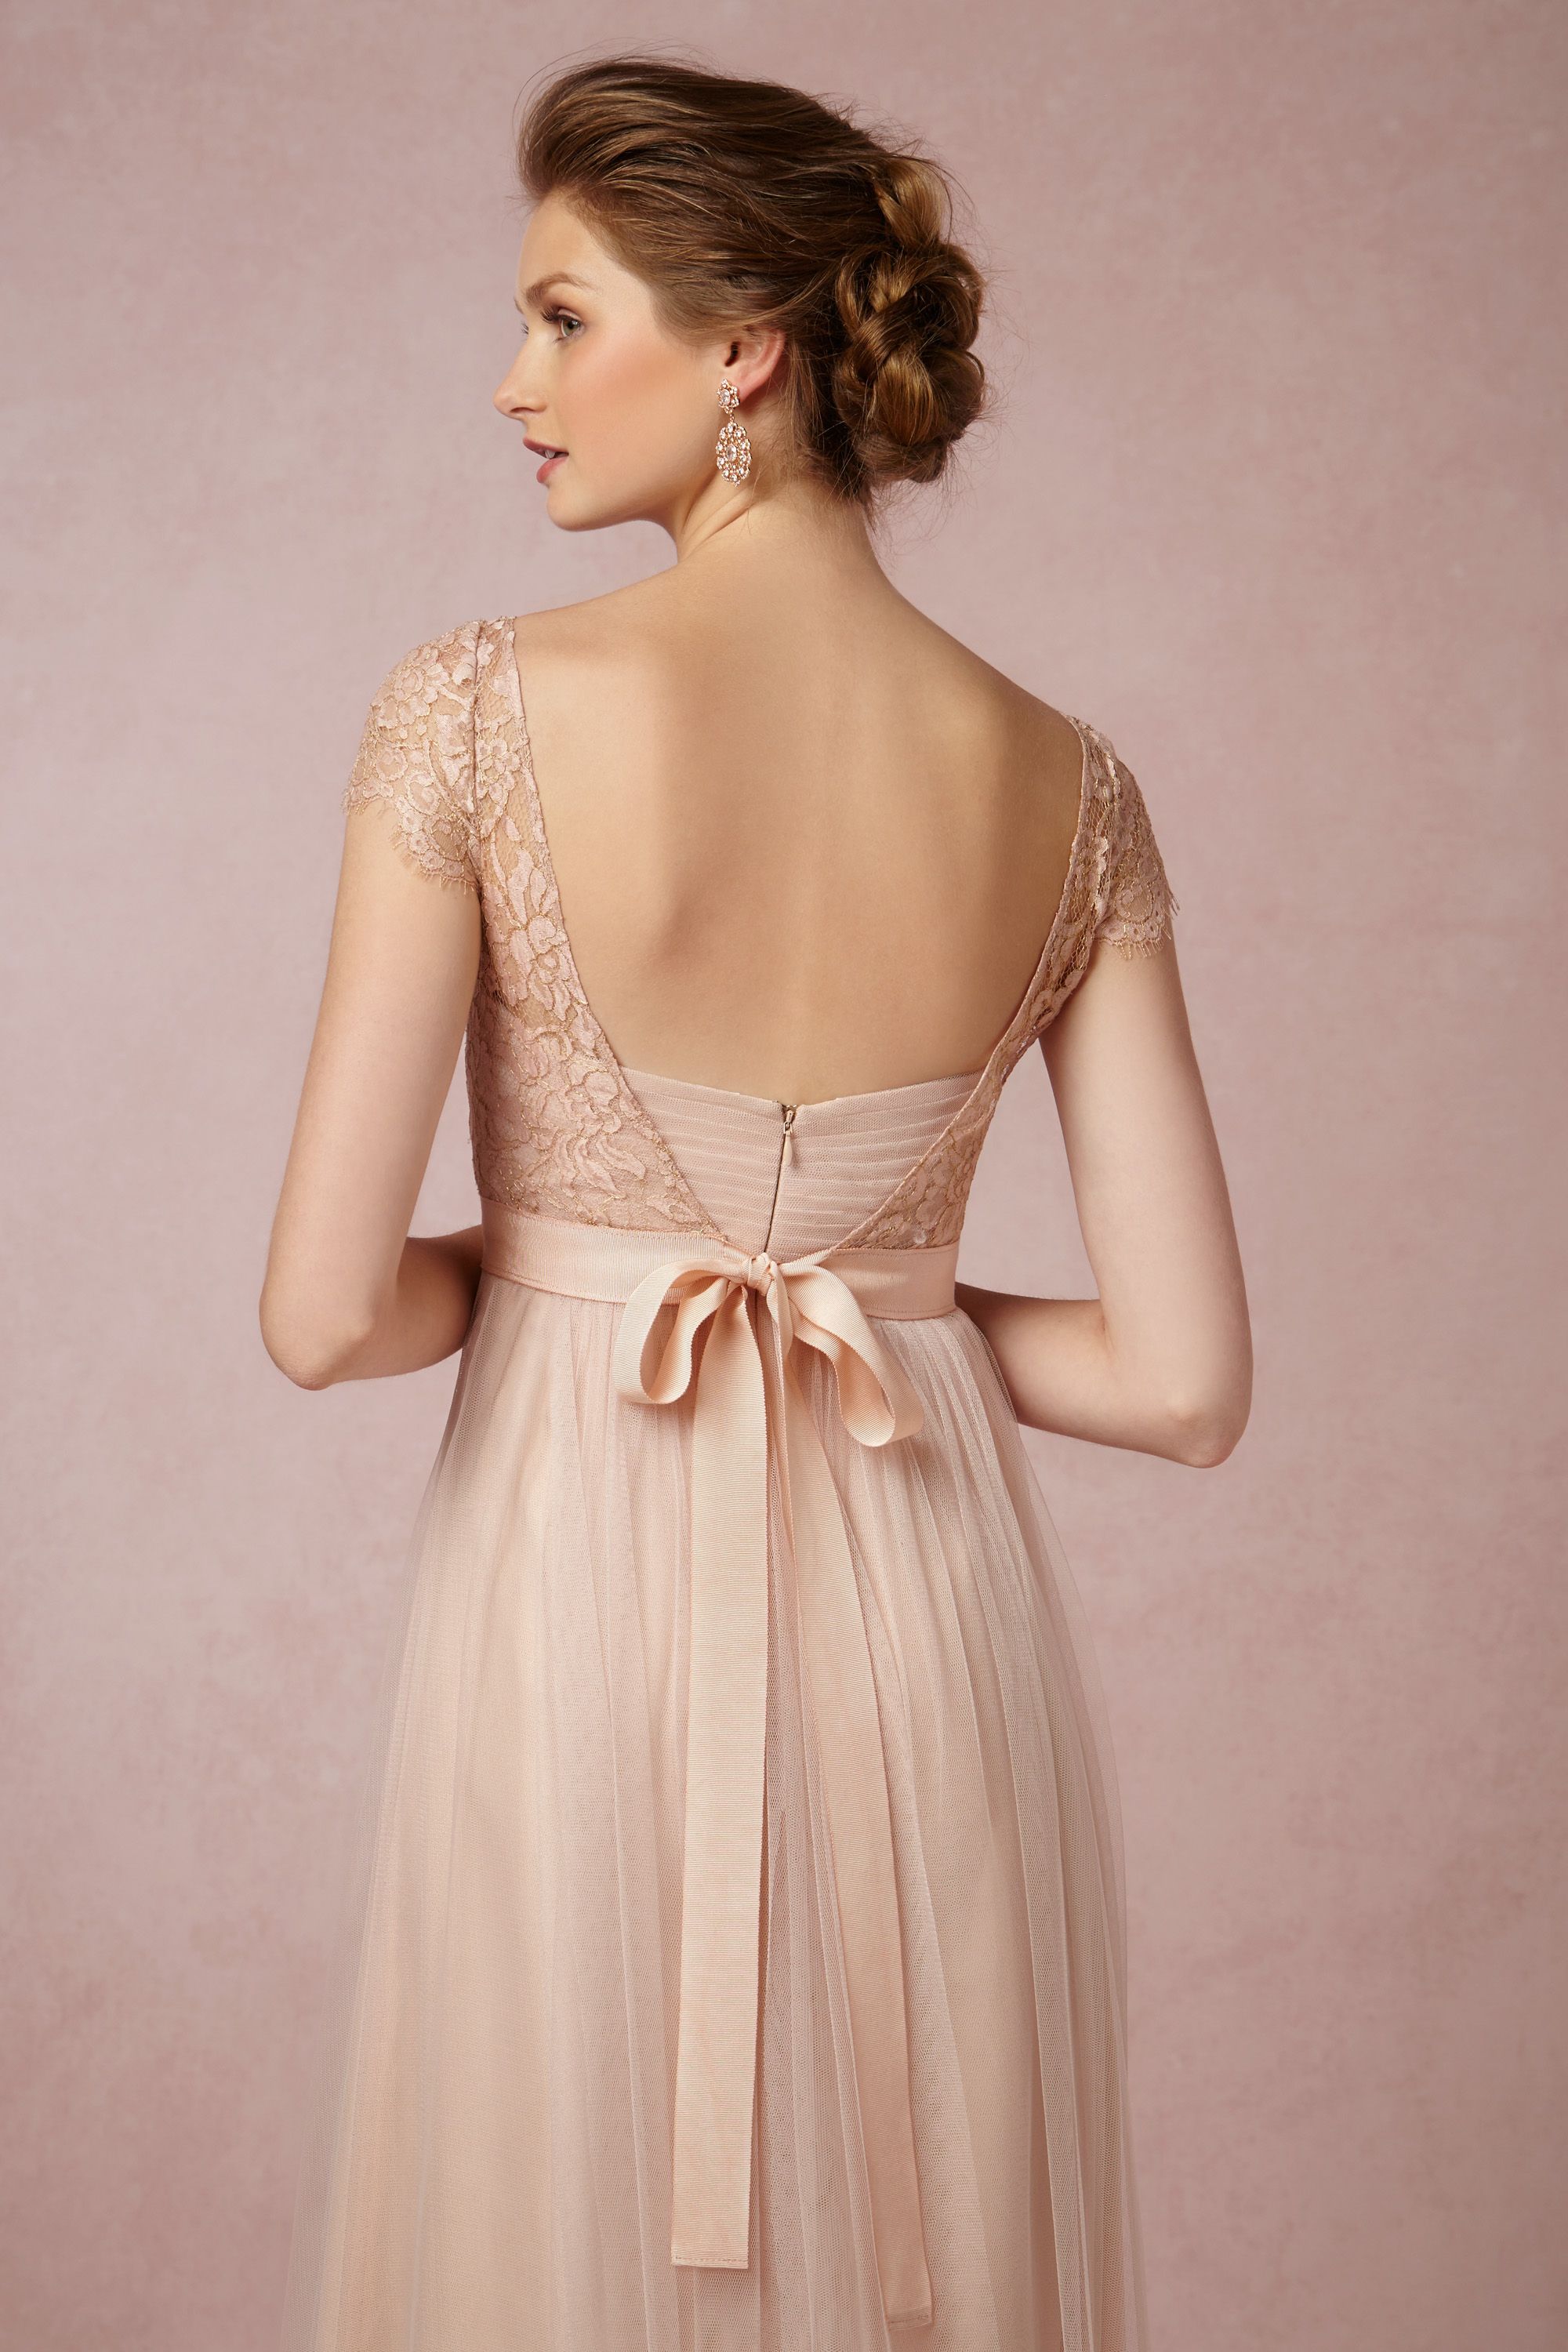 Annabelle Dress  Camille Topper  in Bridal Party BHLDN